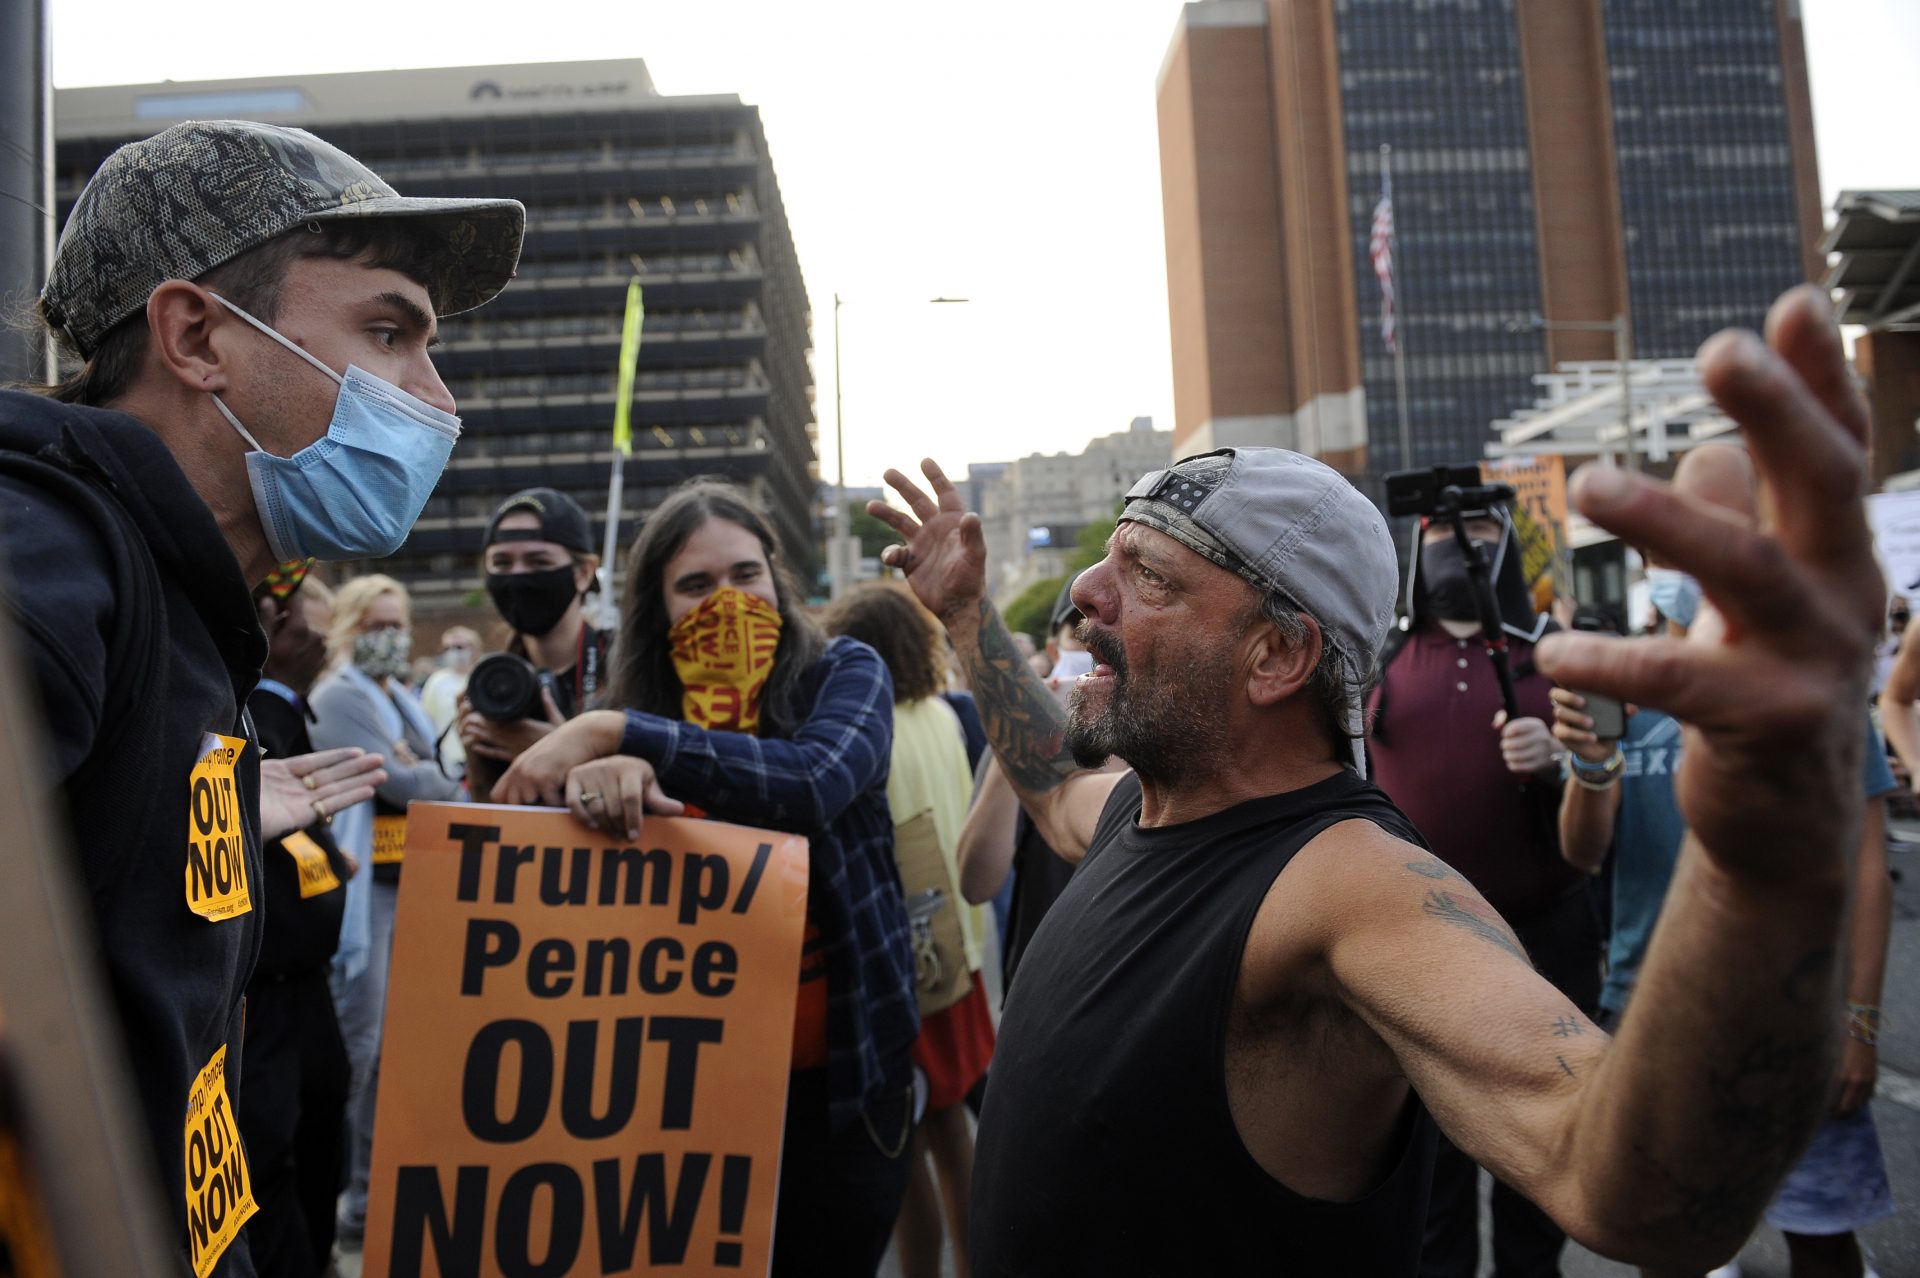 Supporters of President Donald Trump and protesters interact with each other at Independence Mall, Tuesday, Sept. 15, 2020, in Philadelphia. President Trump participated in a town hall at the National Constitution Center.